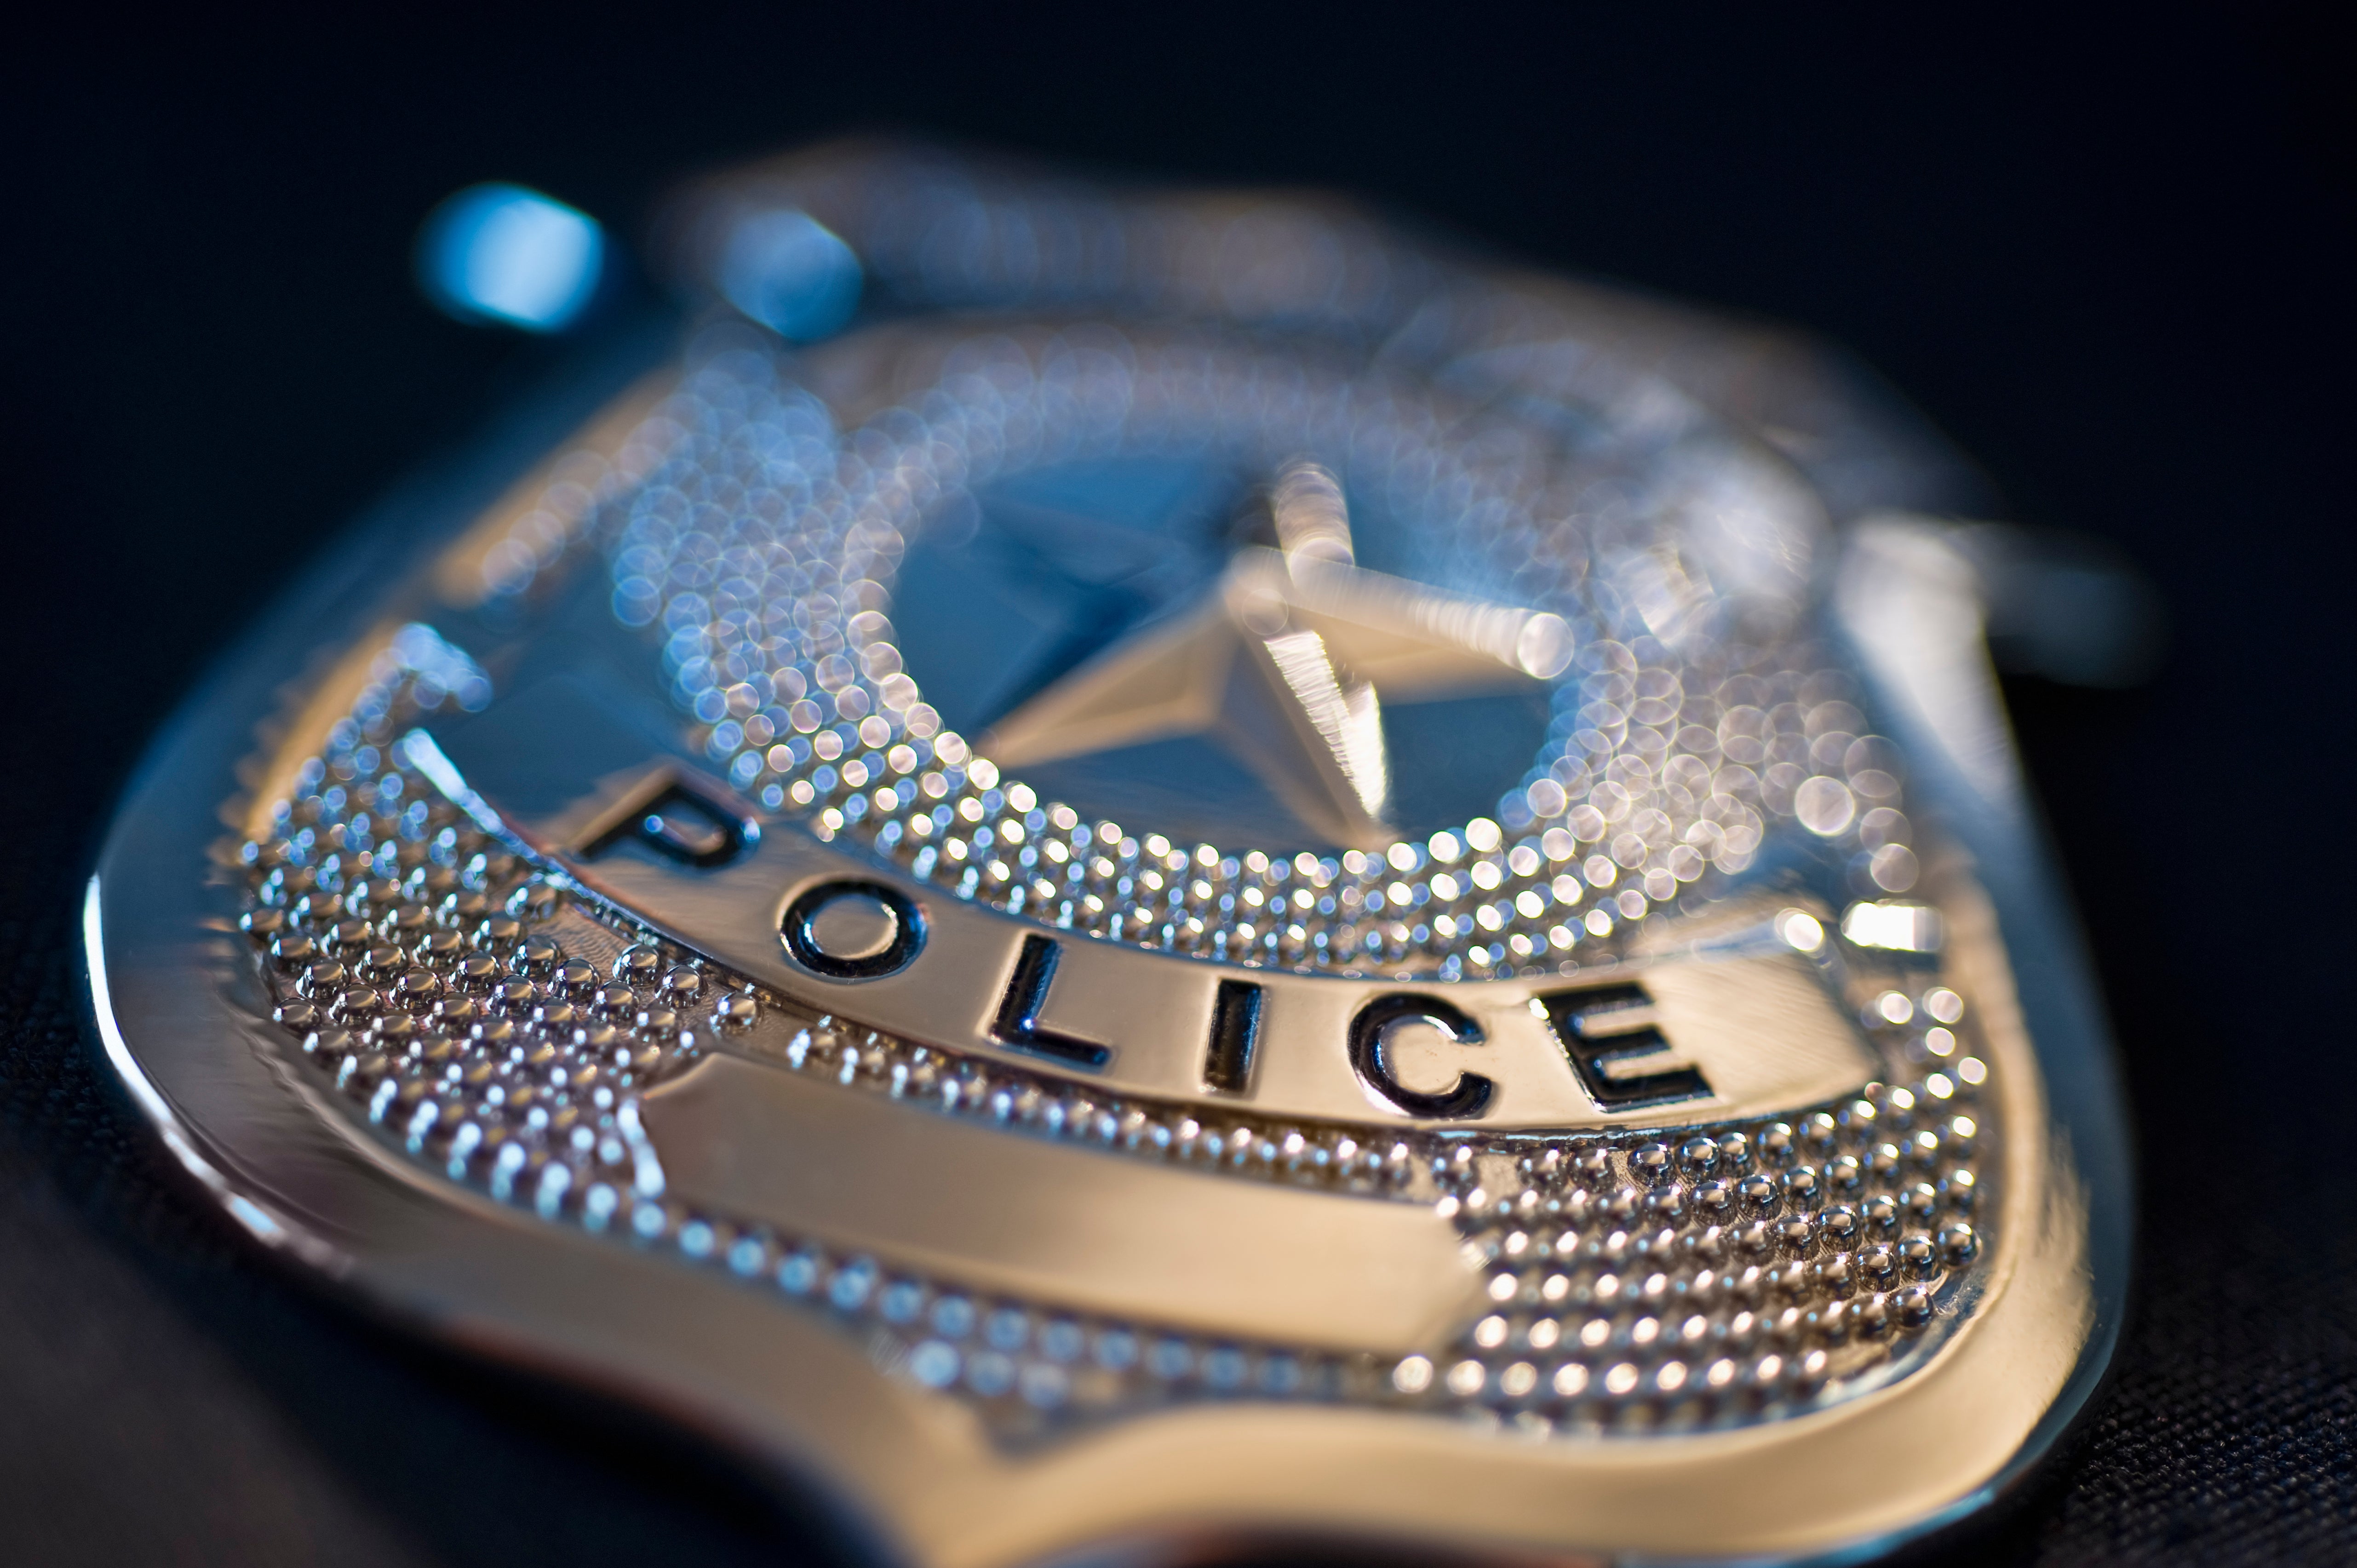 Texas College Student Files Lawsuit Over Racial Profiling In Police Incident 